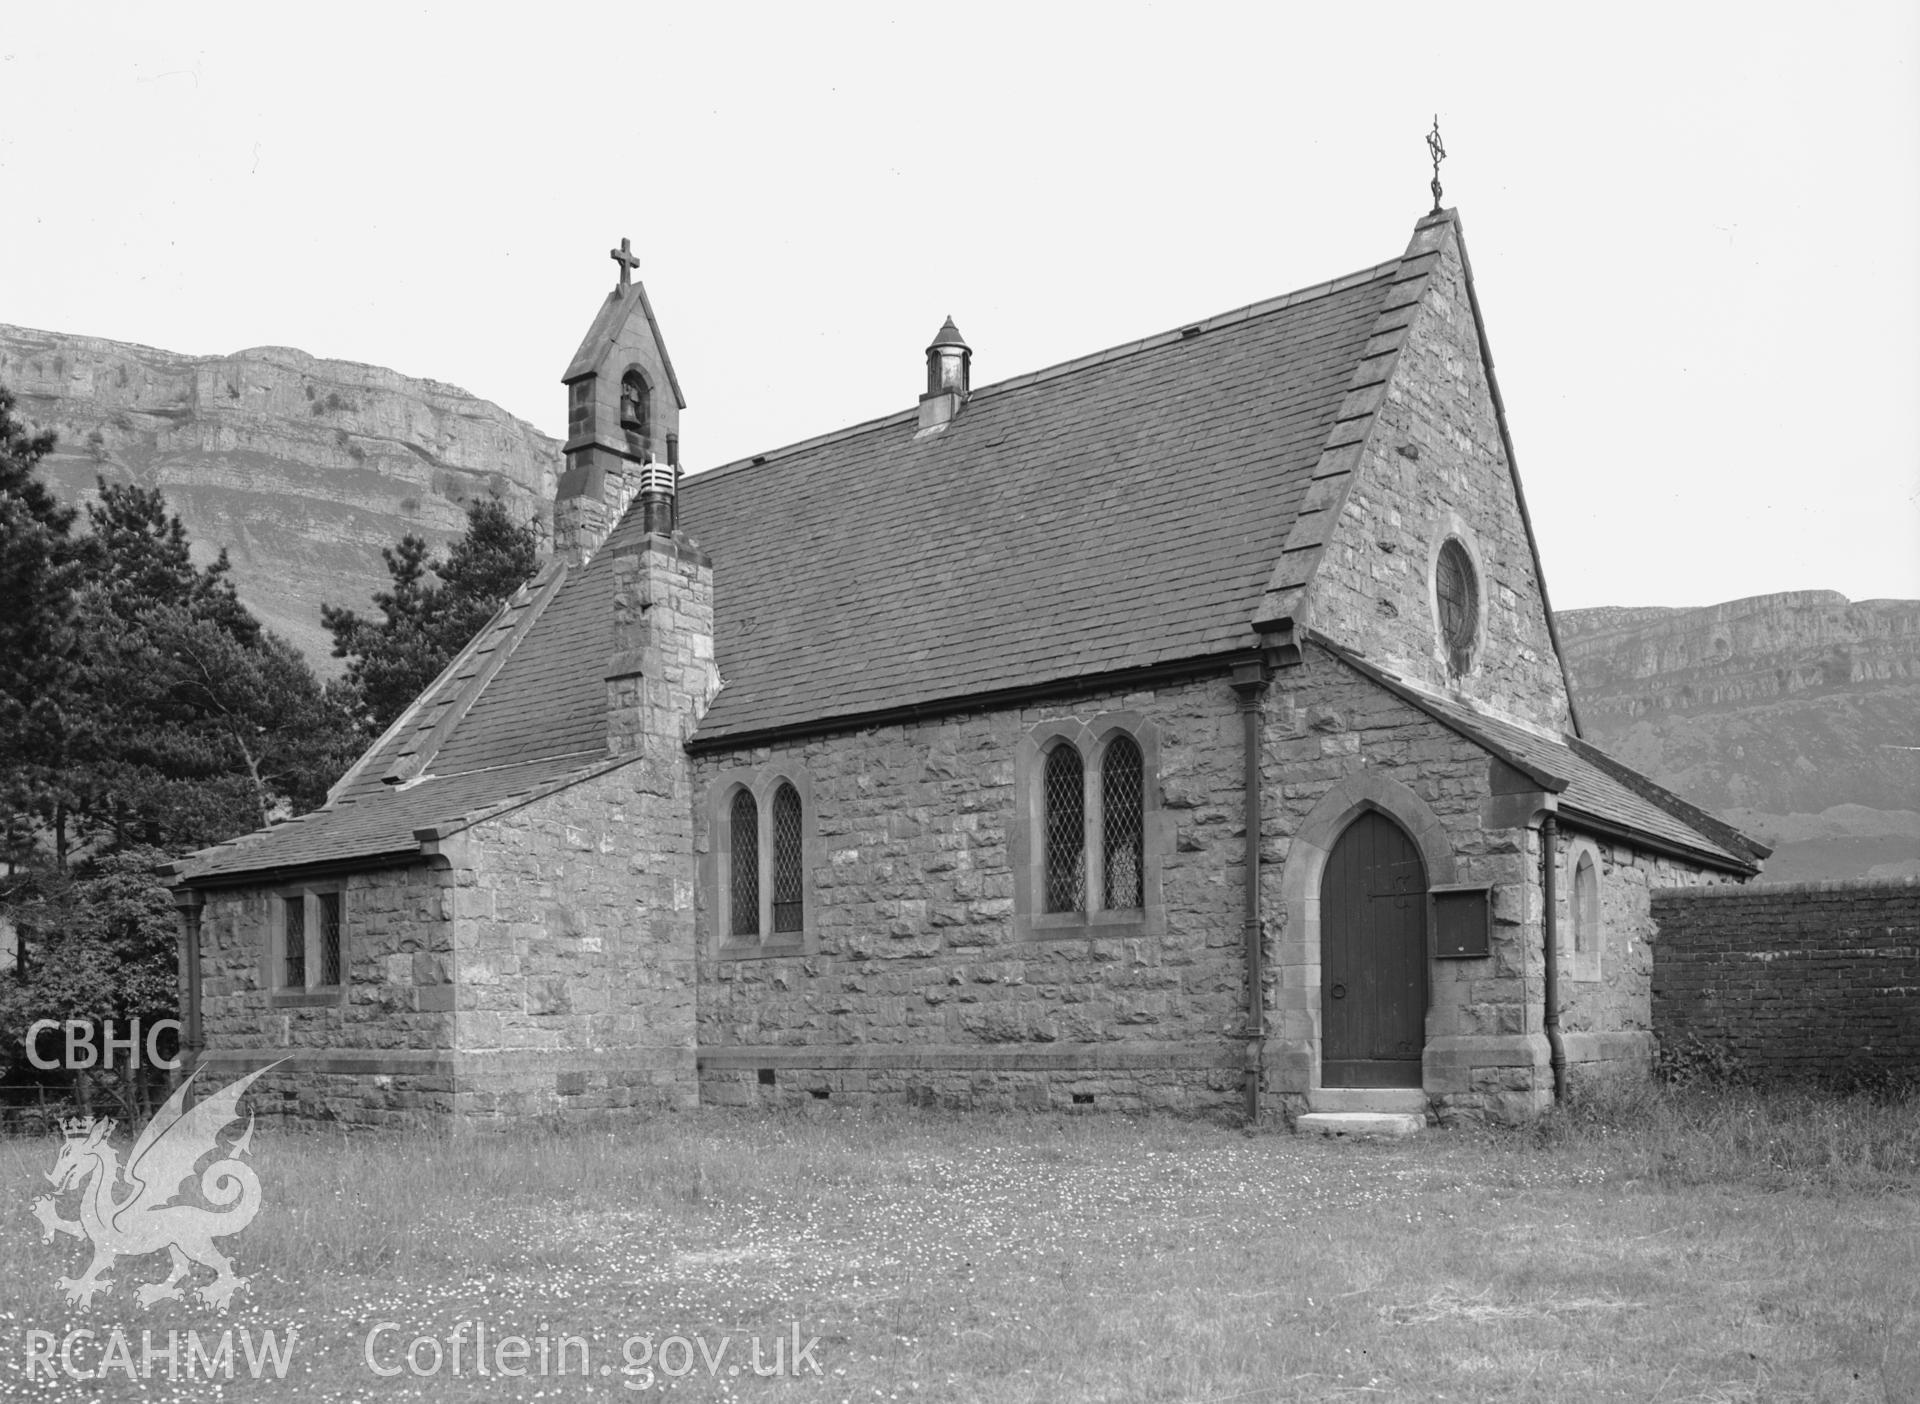 A black and white print showing St Mary Mission Church, Eglwyseg